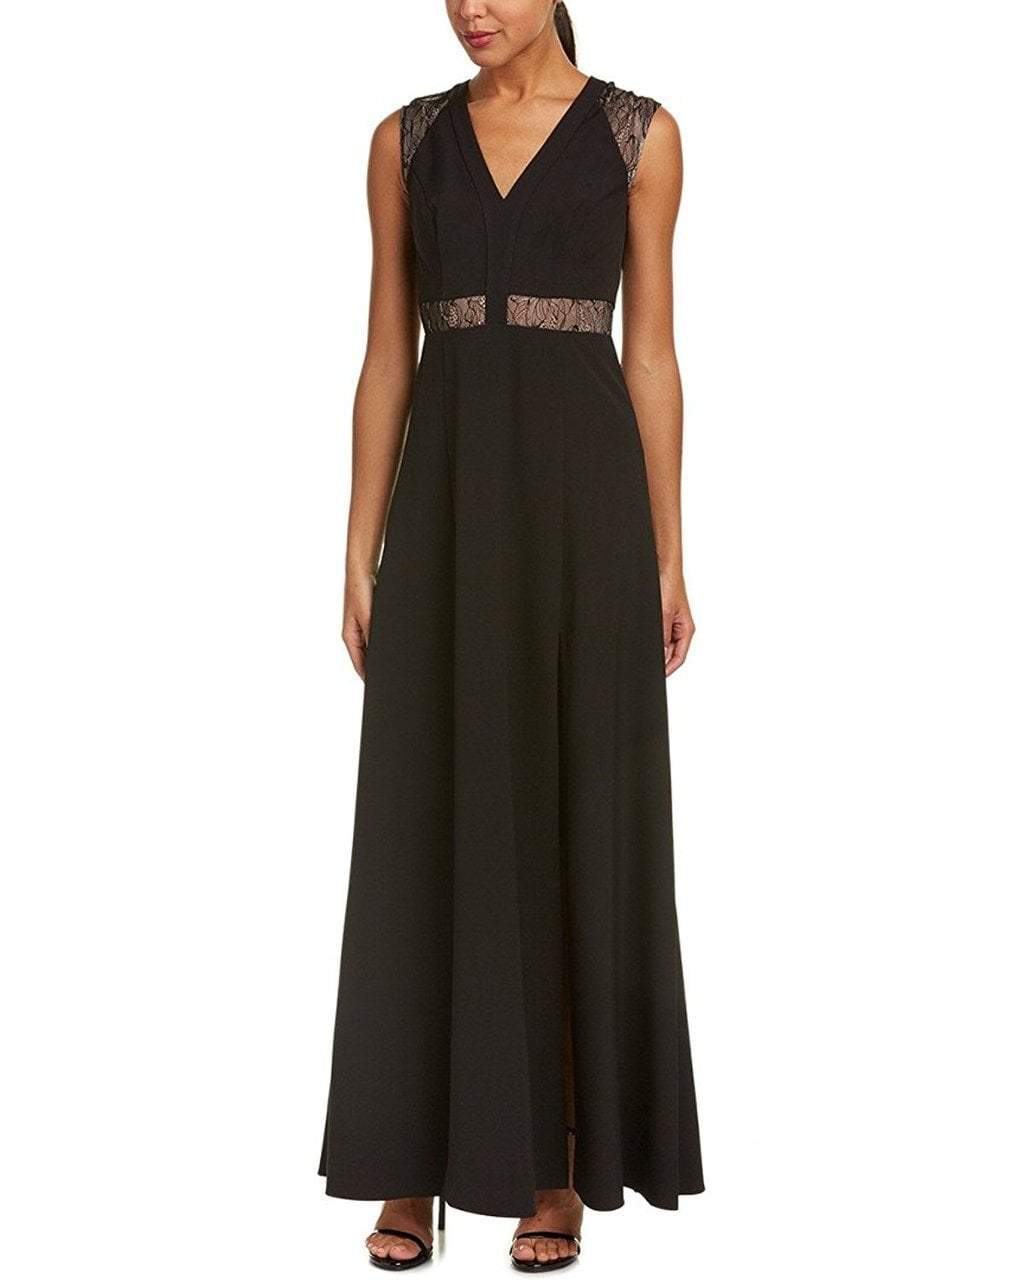 Image of Aidan Mattox - MN1E201092 Lace Paneled Cap Sleeve Crepe A-line Gown